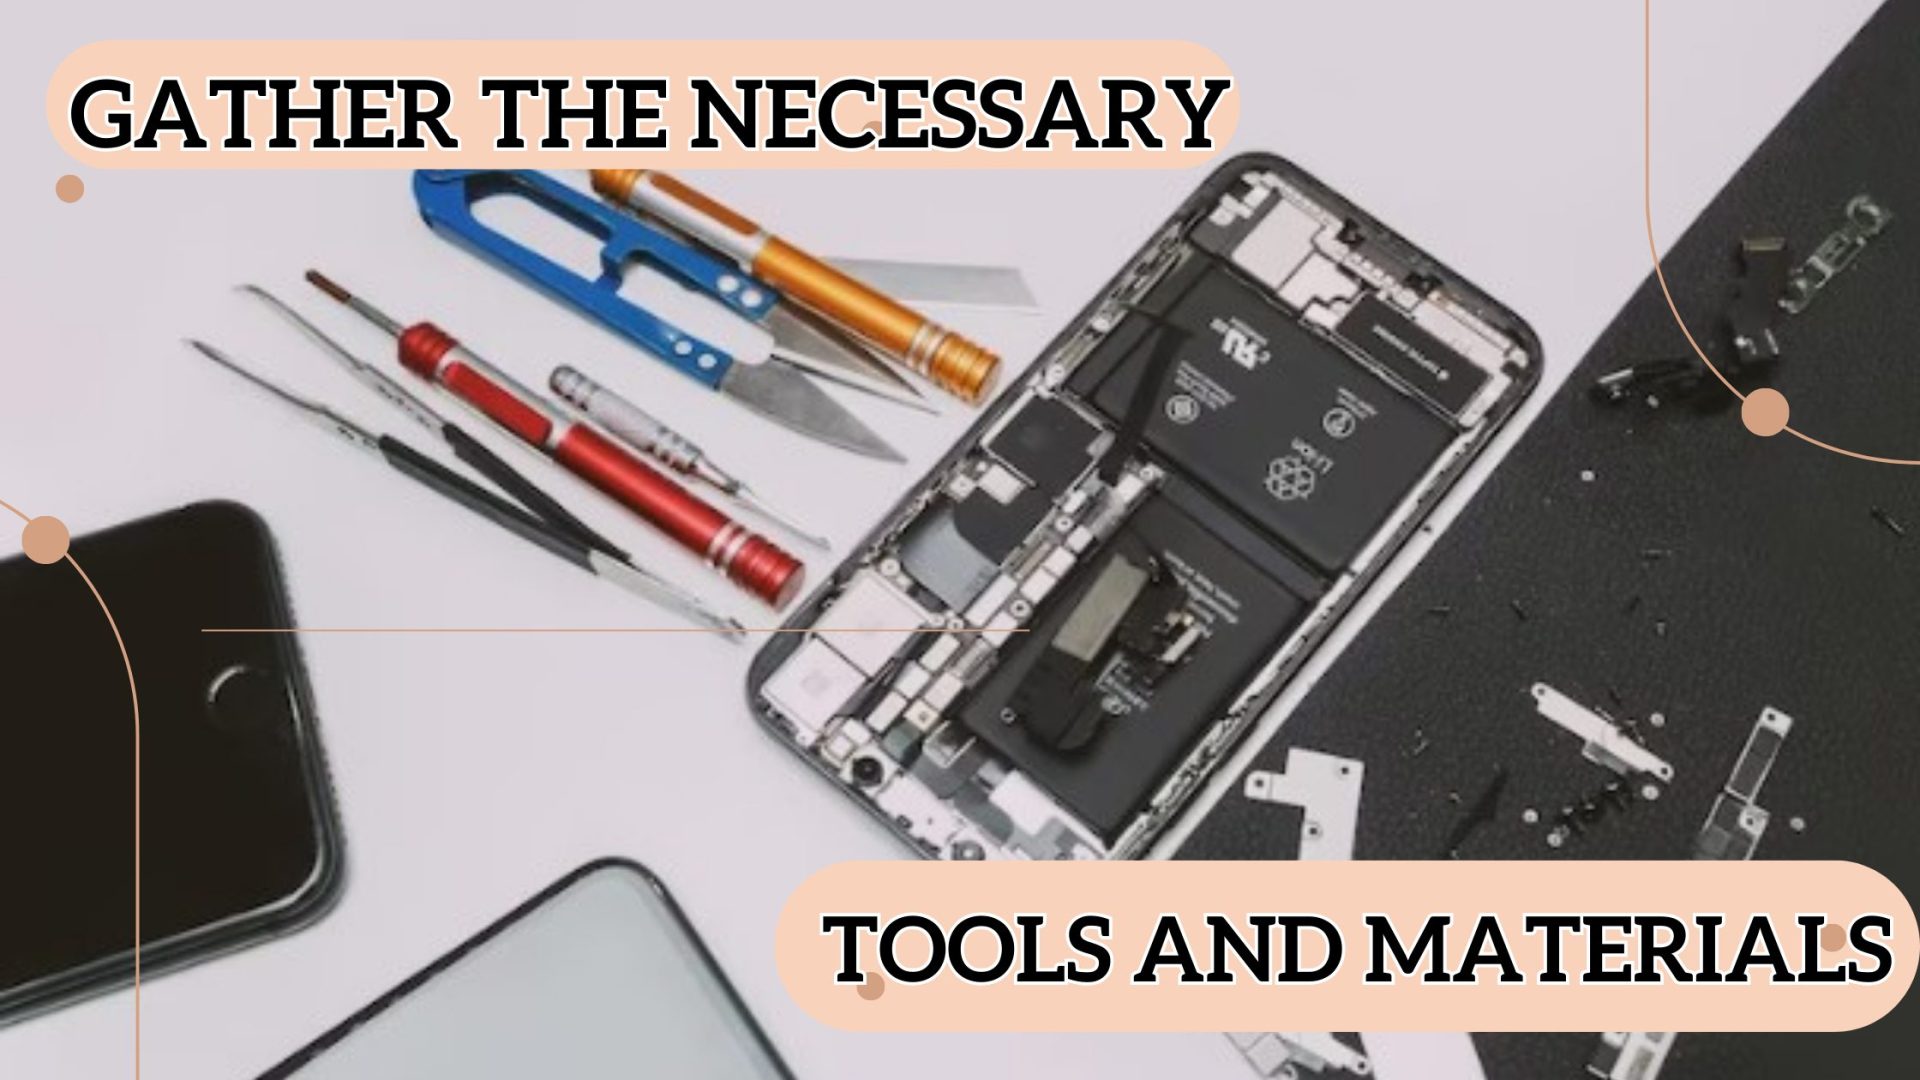 Gather the Necessary Tools and Materials